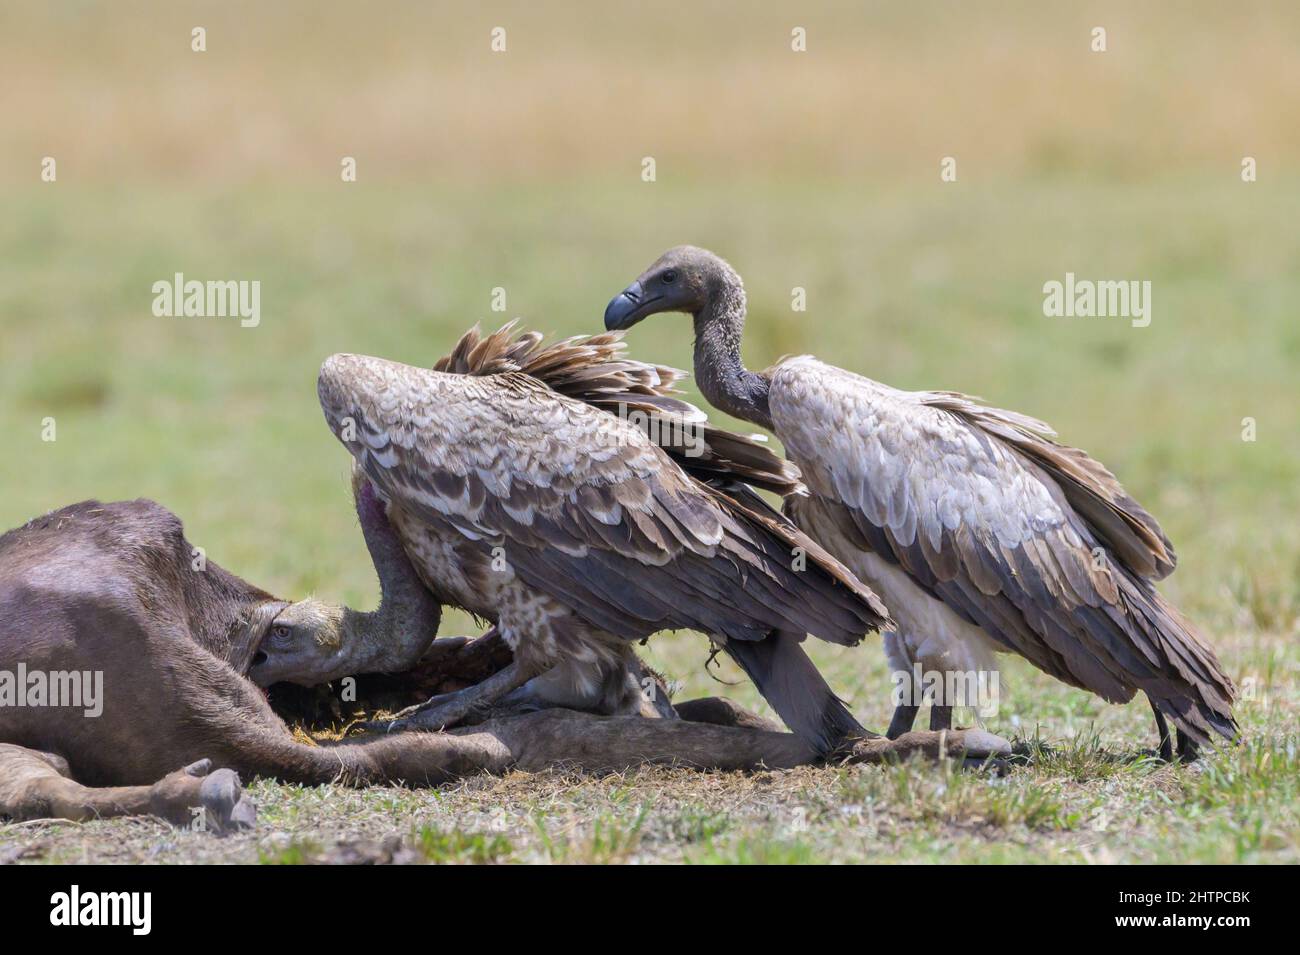 White-backed Vulture (Gyps africanus) eating from a wildebeest carcass on savanna, Serengeti national park, Tanzania. Stock Photo